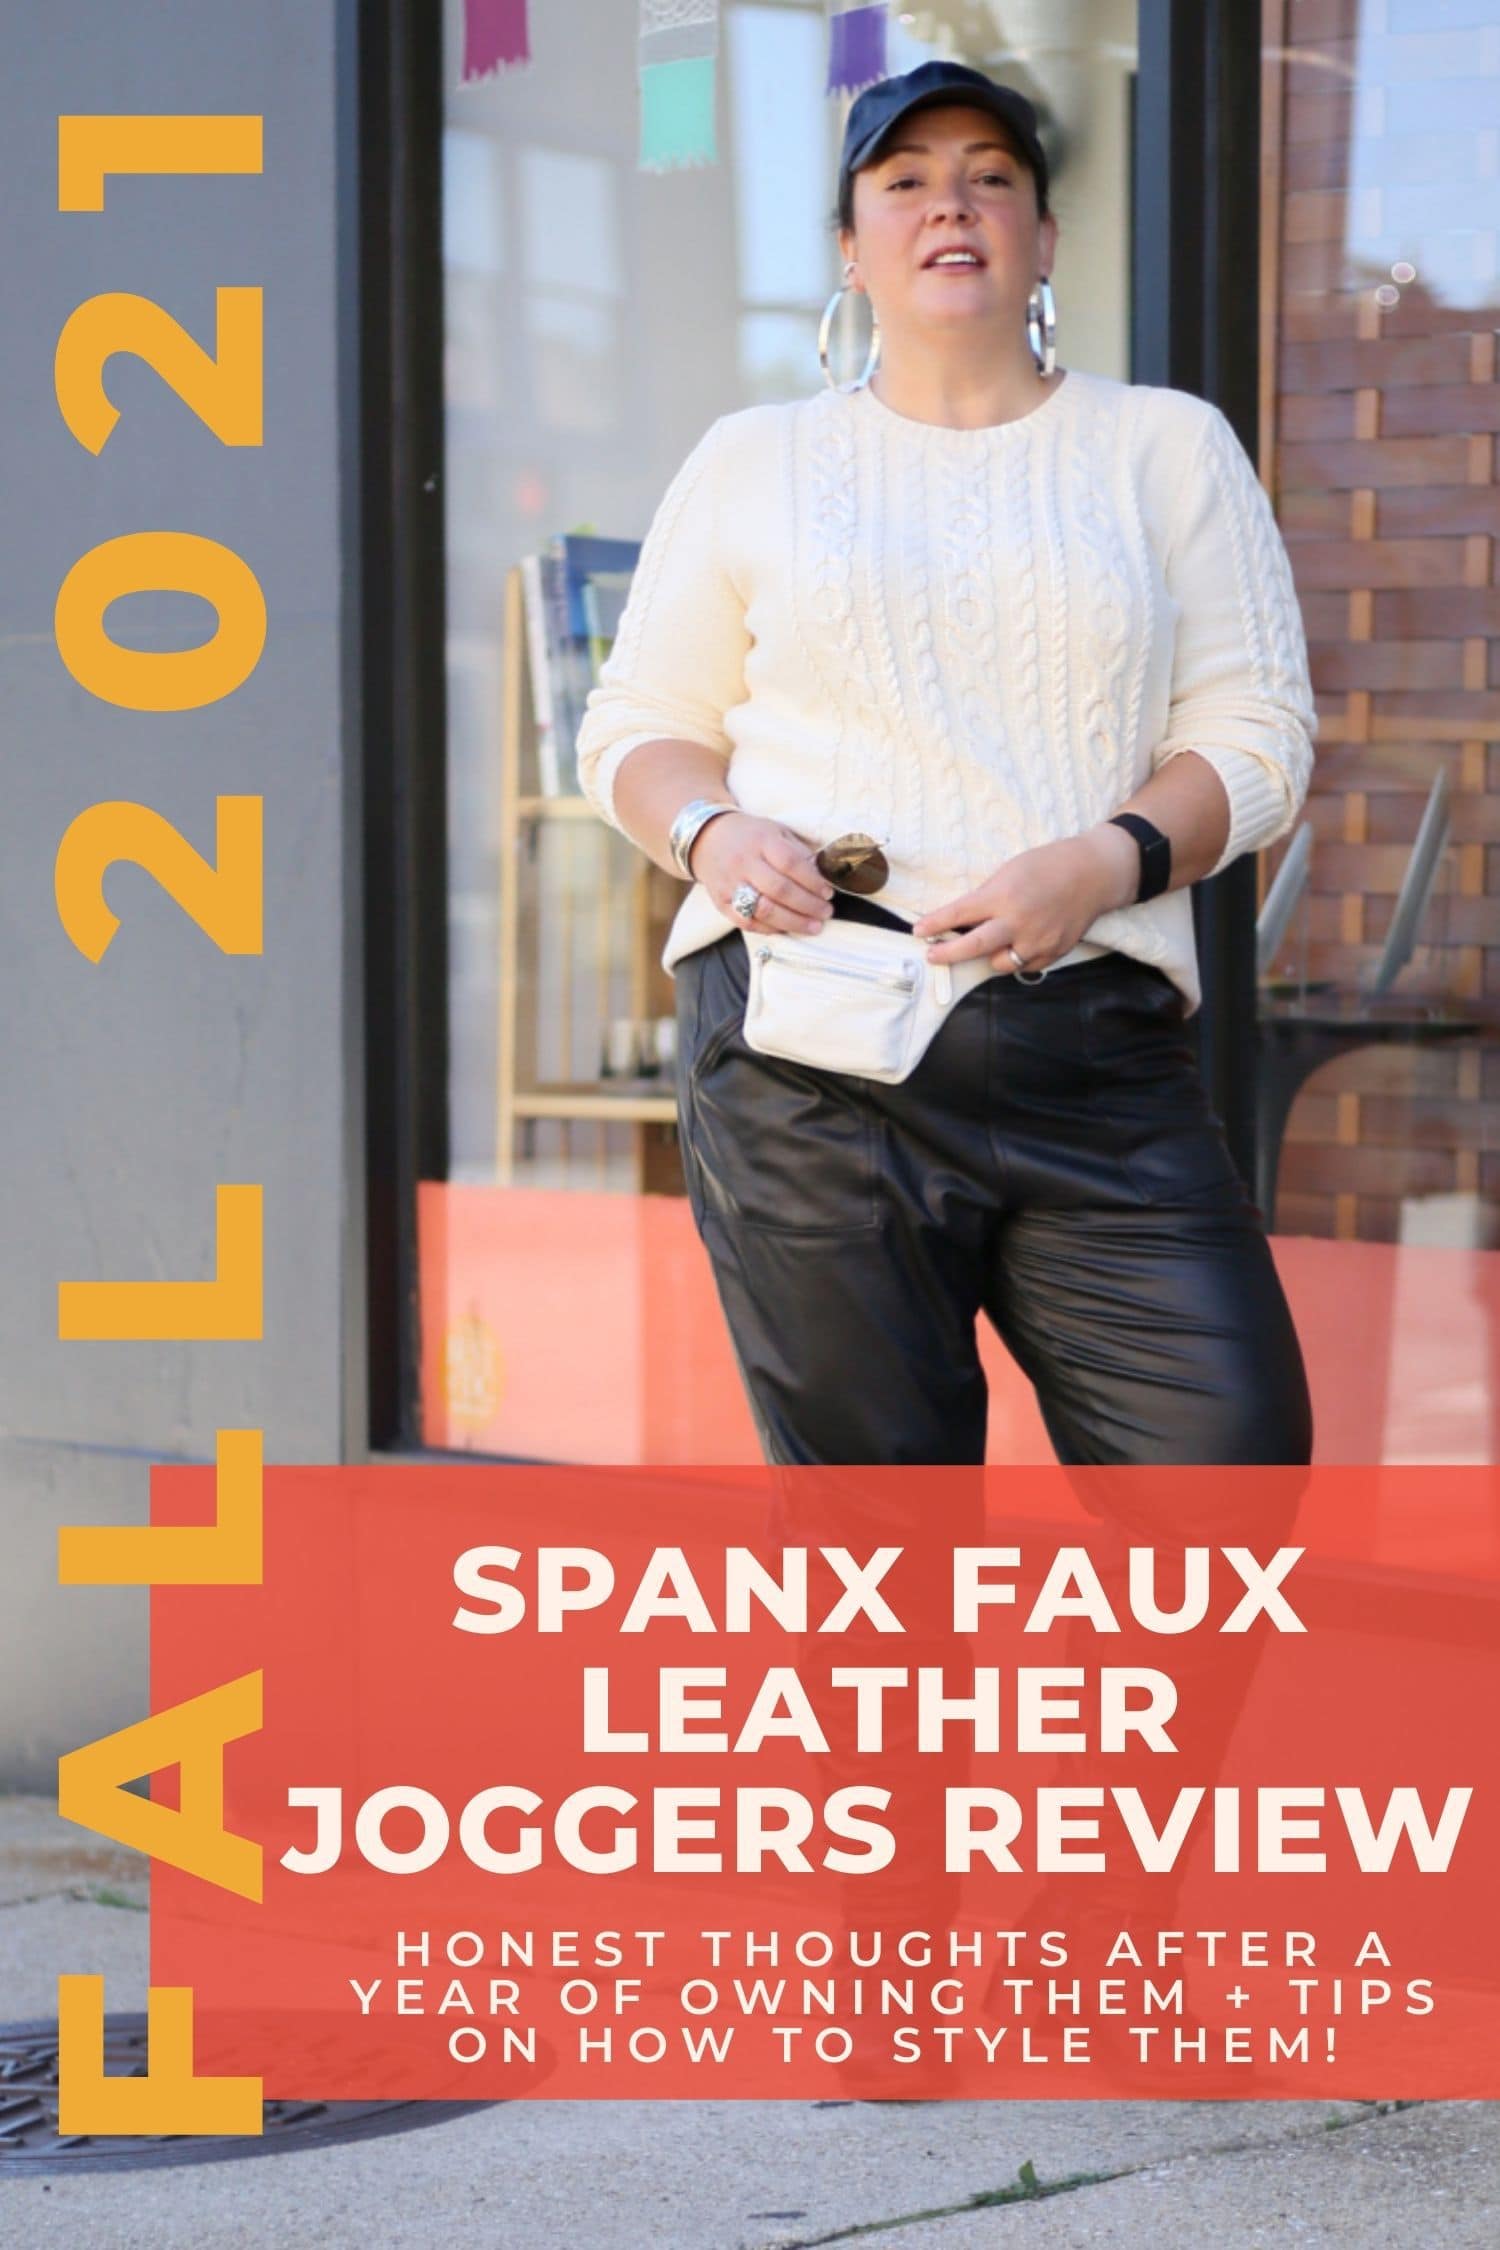 Spanx Faux Leather Joggers Review